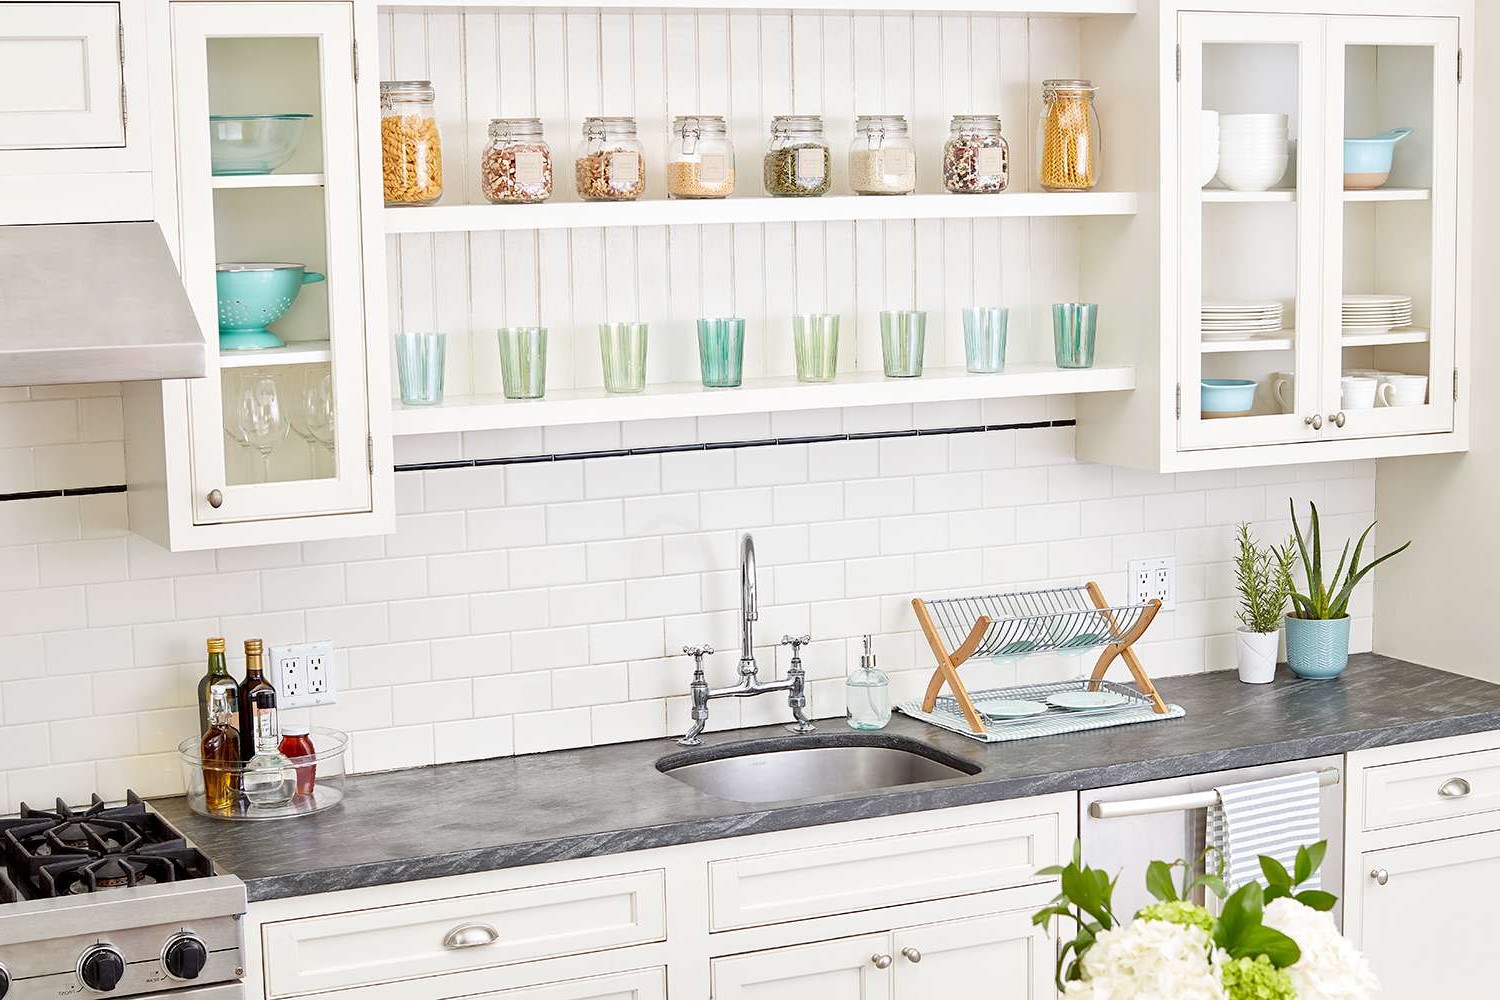 How To Organize A Kitchen Cabinet